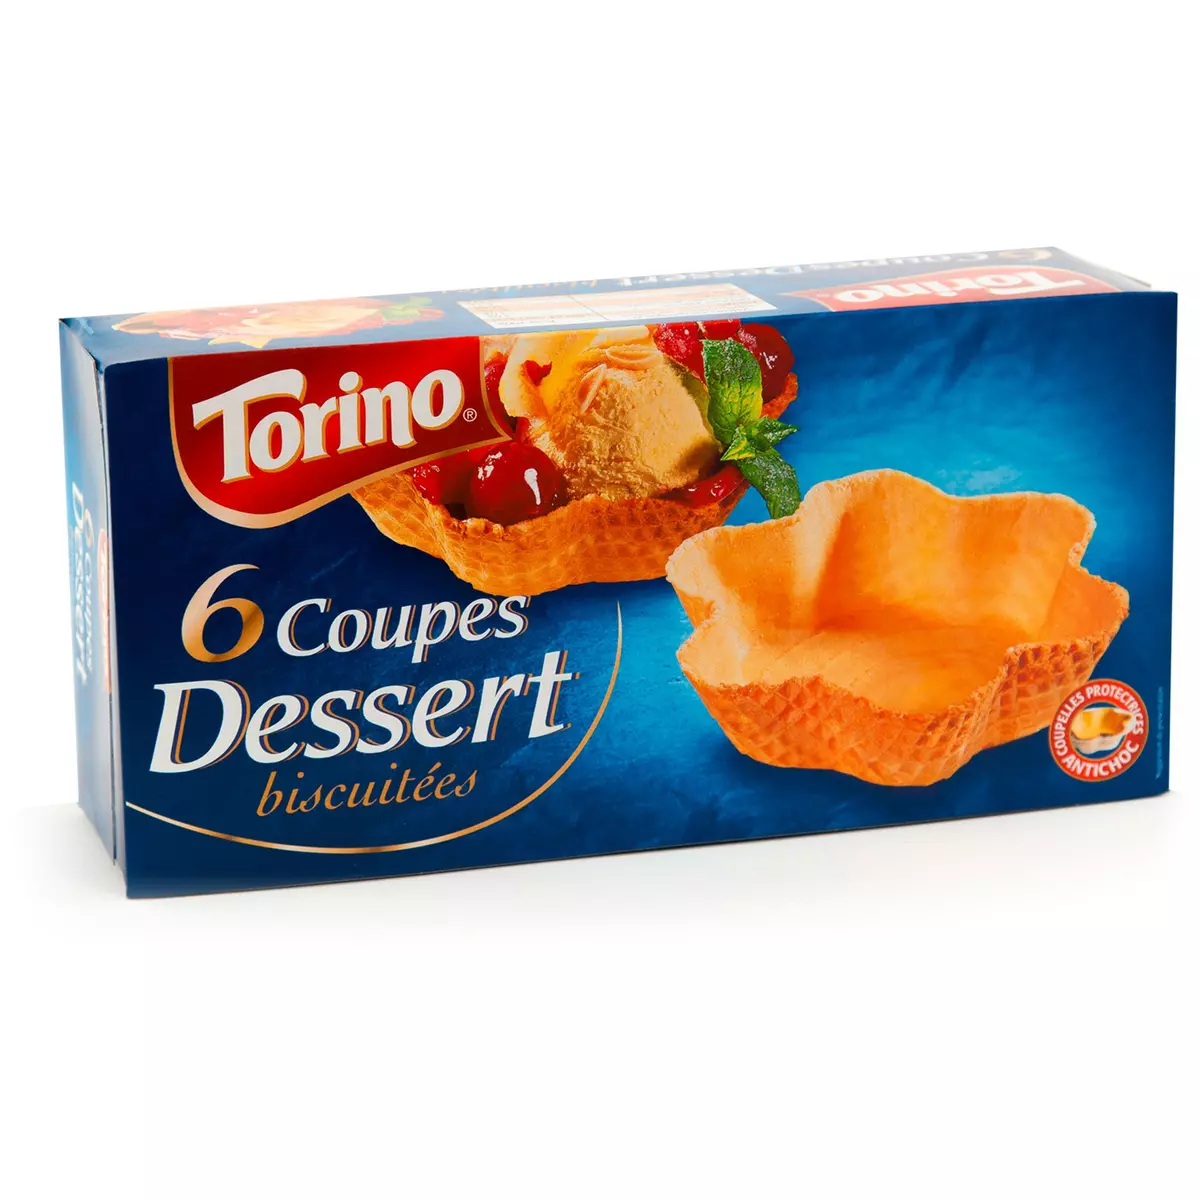 TORINO Coupe a dessert biscuitées  6 pièces  90g